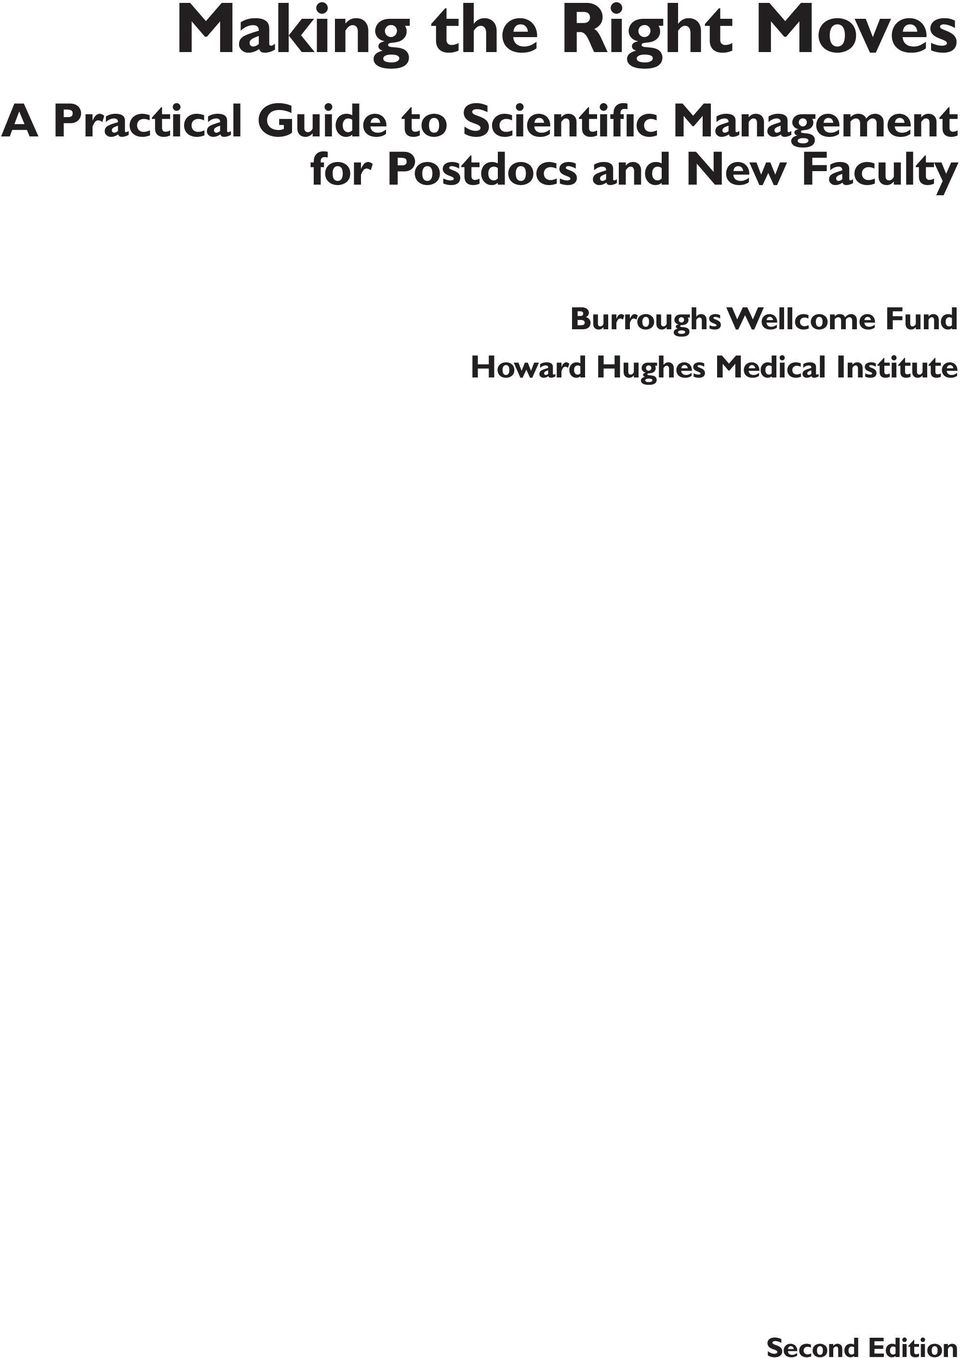 New Faculty Burroughs Wellcome Fund